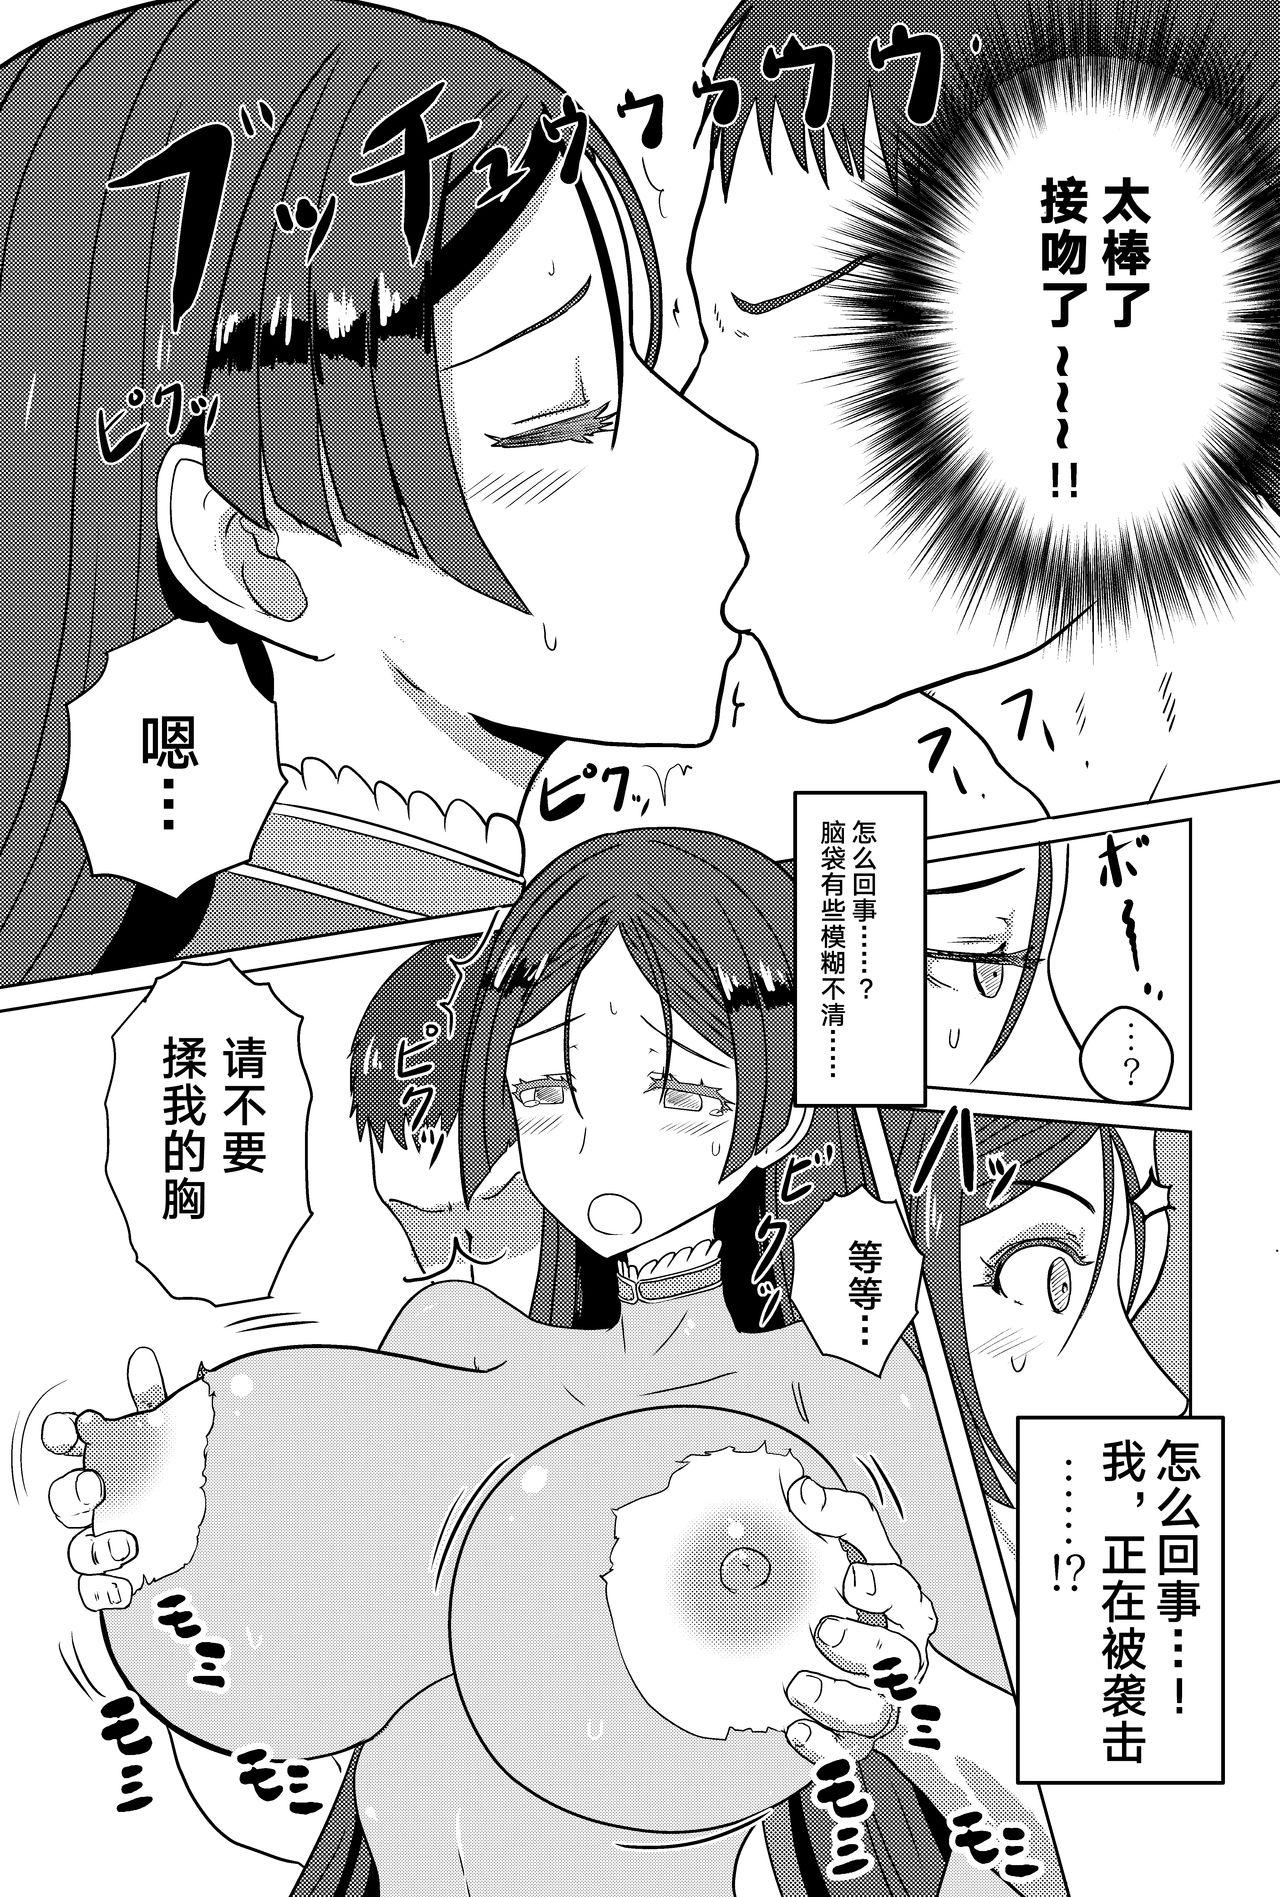 Solo Female 頼光ママとえっちする本 - Fate grand order Jerk Off Instruction - Page 5